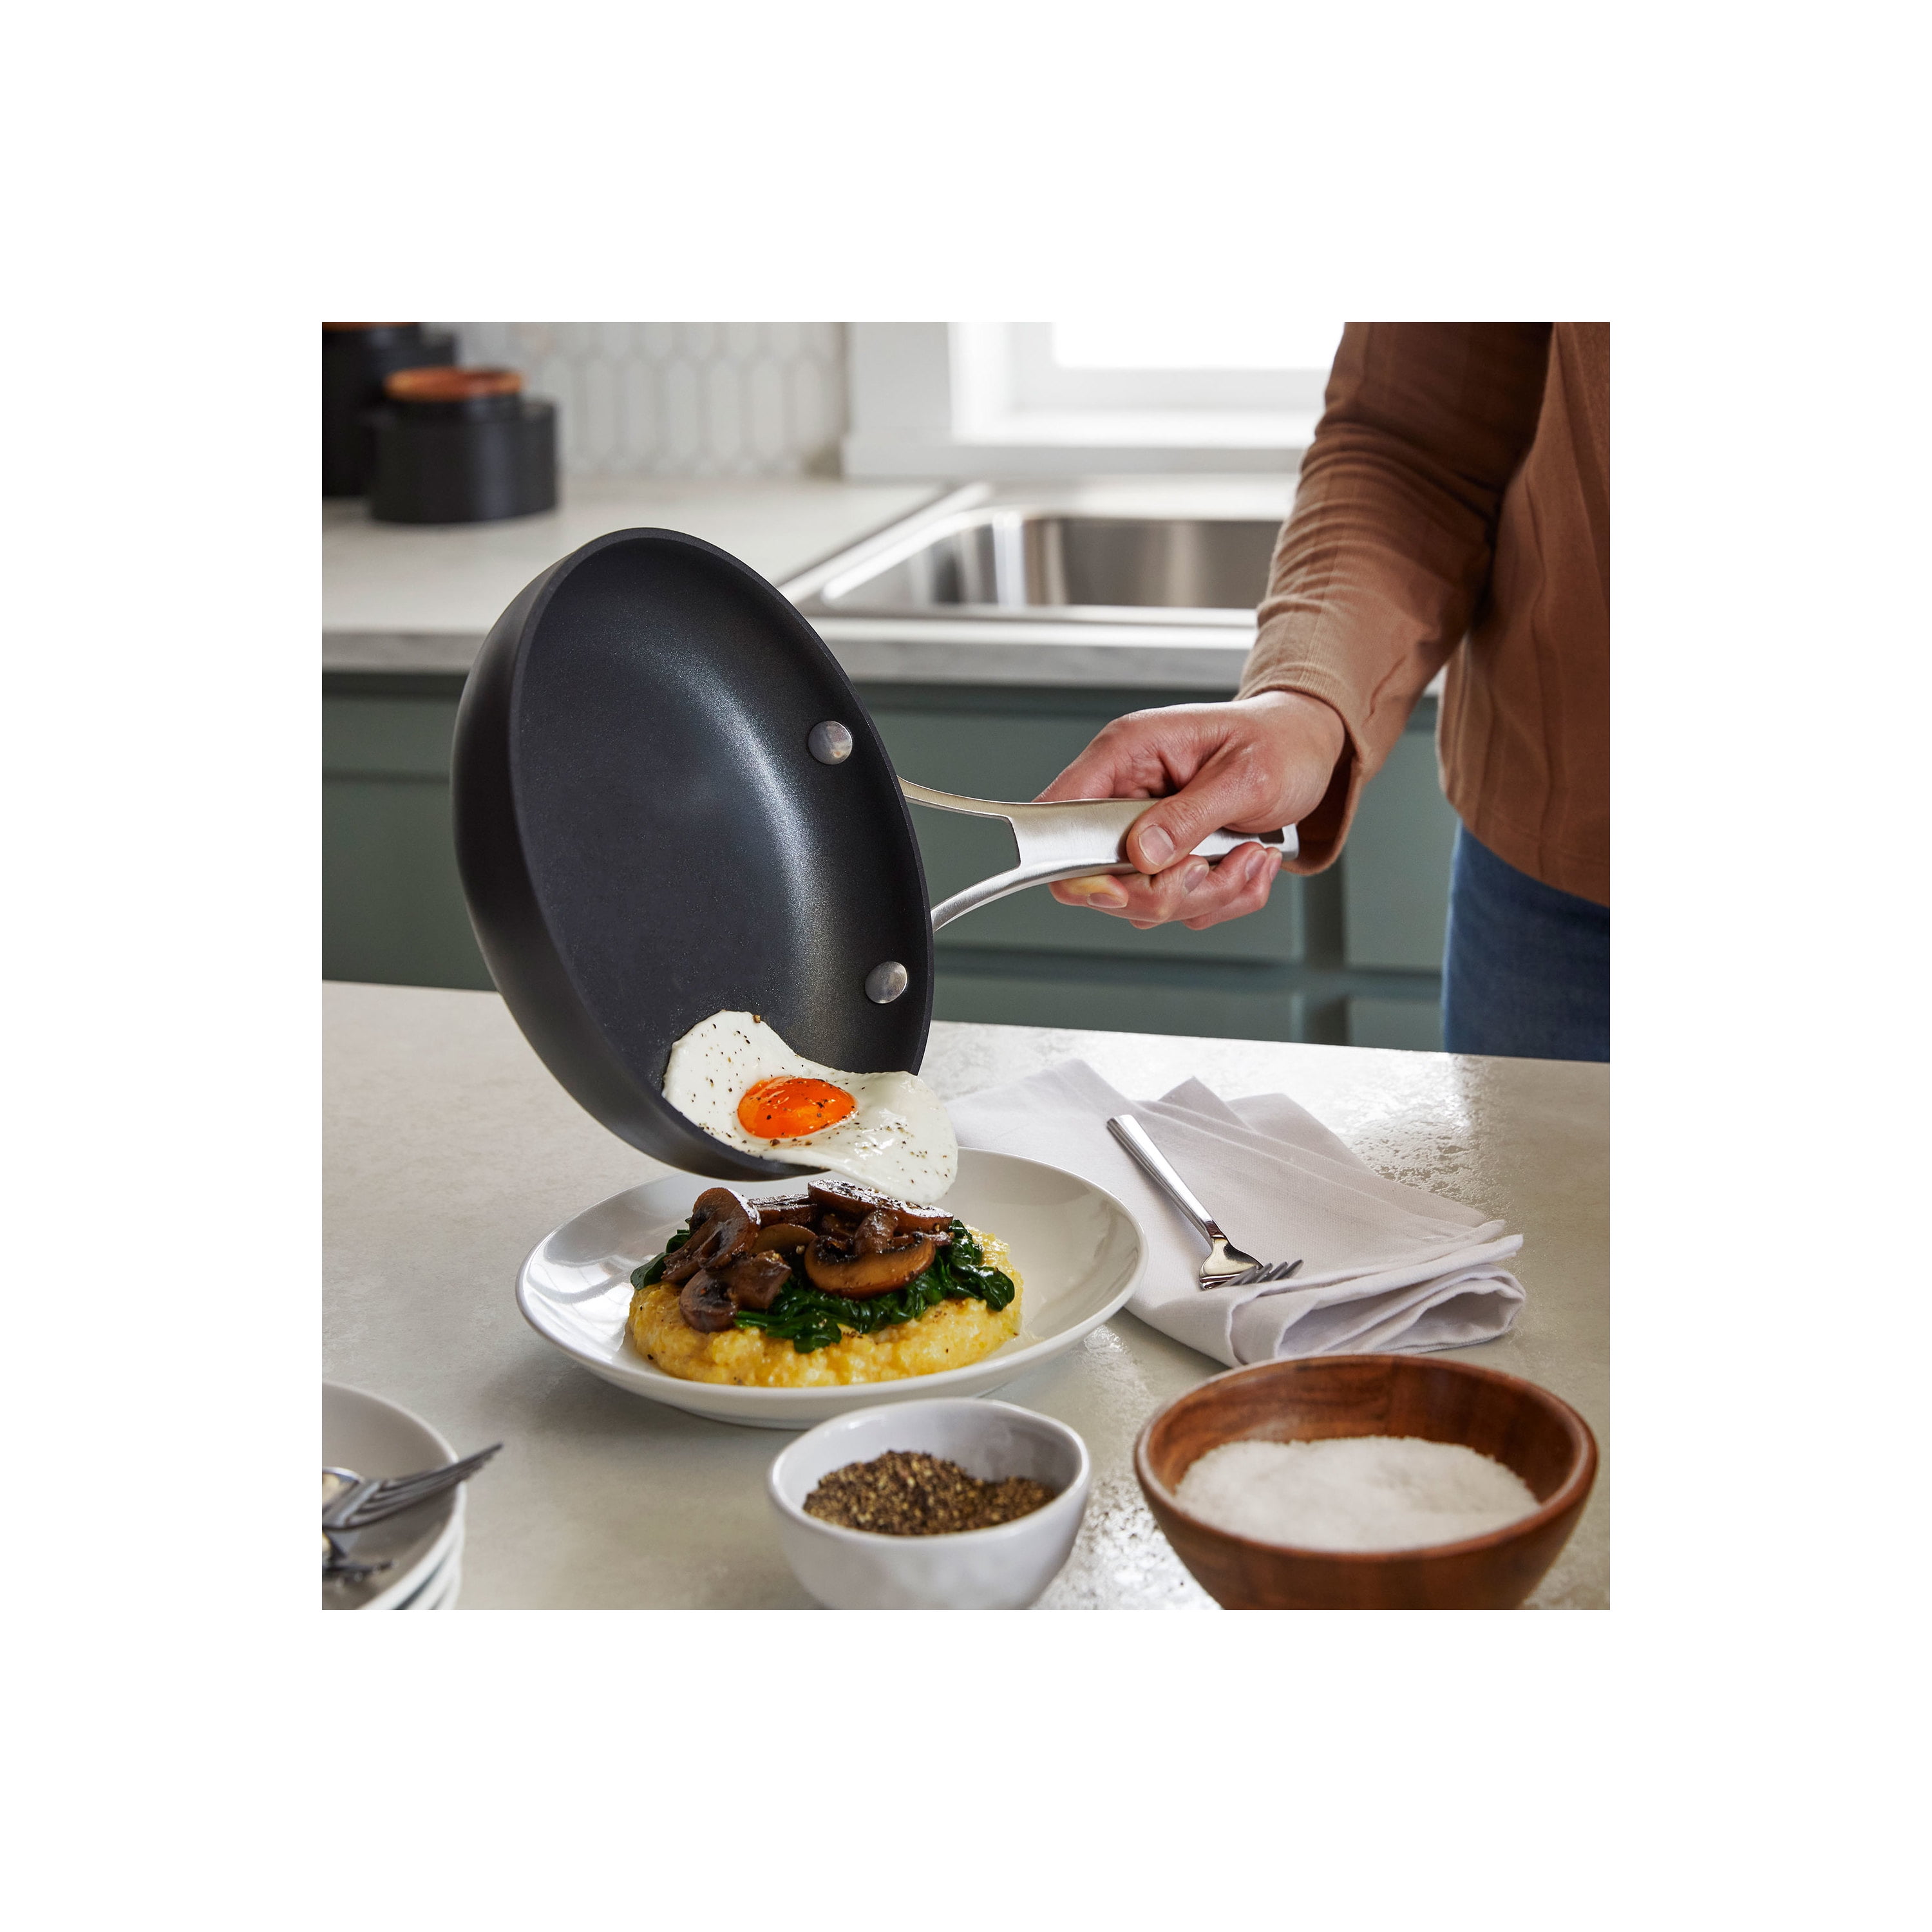 Calphalon Griddle Ribbed Frying Pan Nonstick 11 Square Hard-Anodized Grill